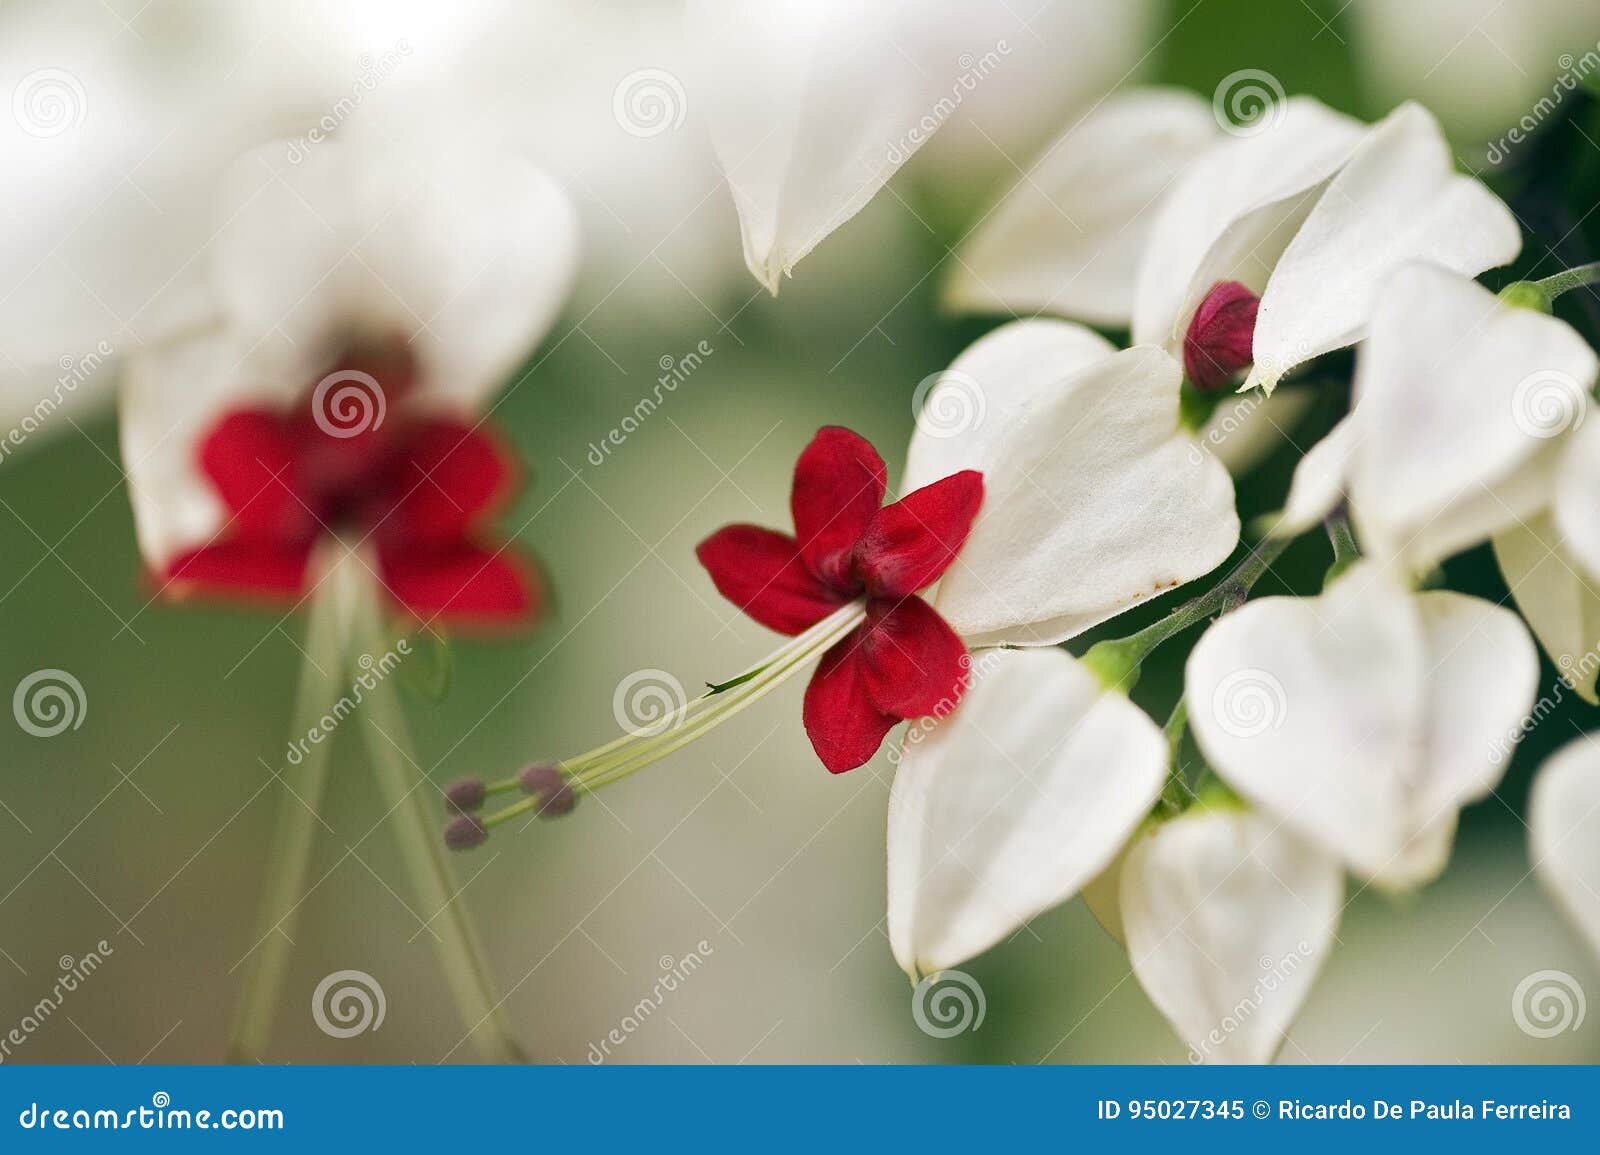 white and red flower on green background